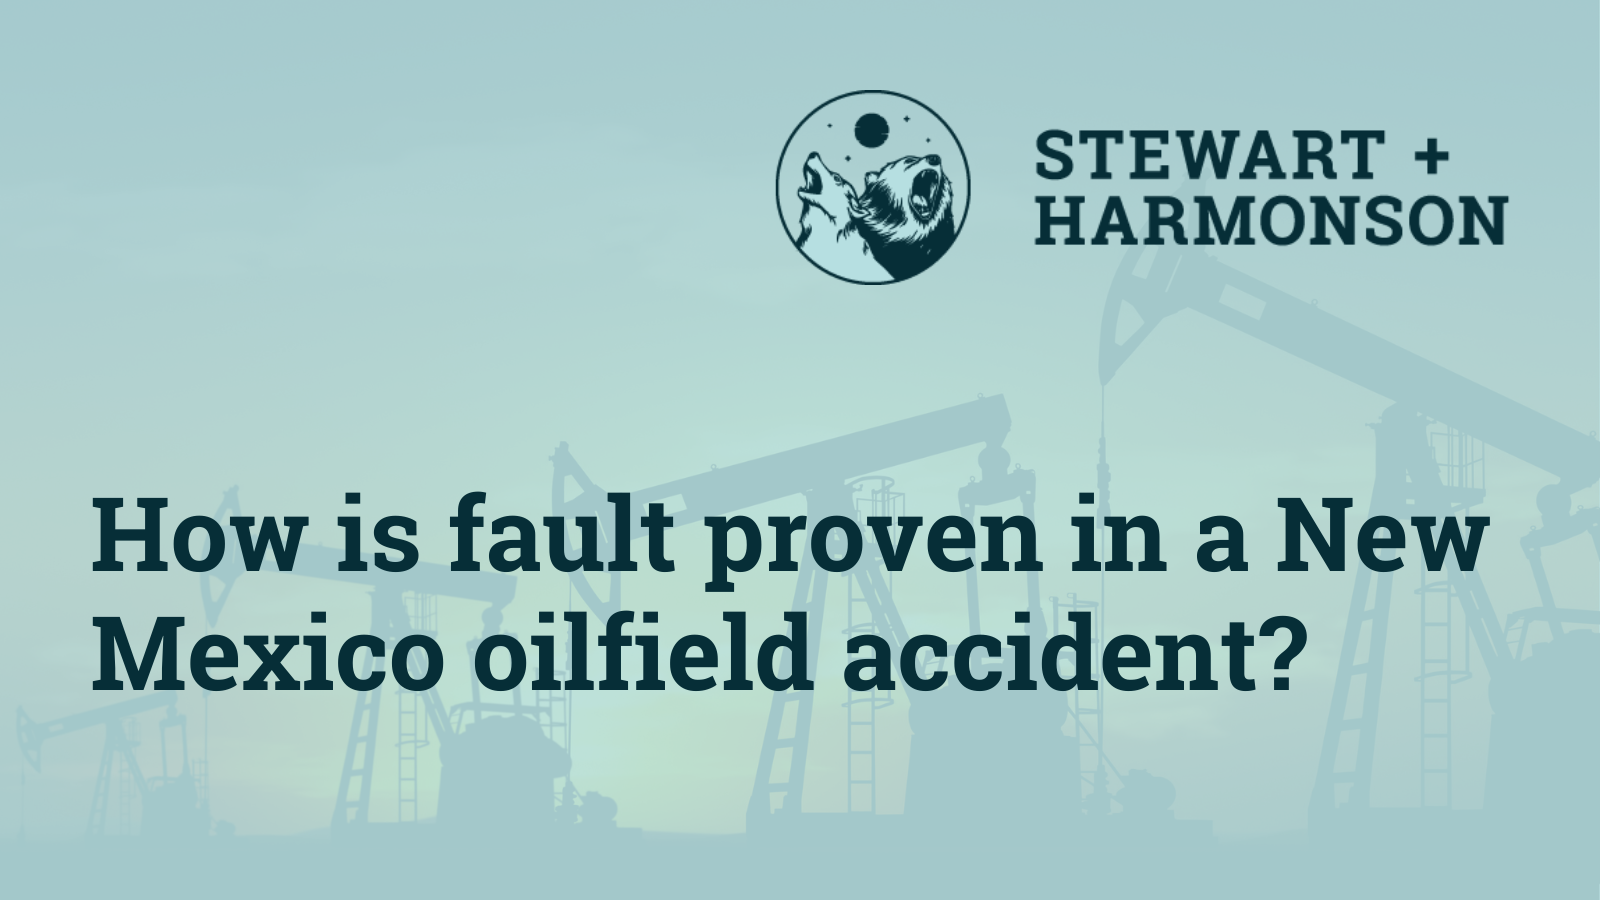 How is fault proven in a New Mexico oilfield accident - Stewart Harmonson Law Firm - New Mexico